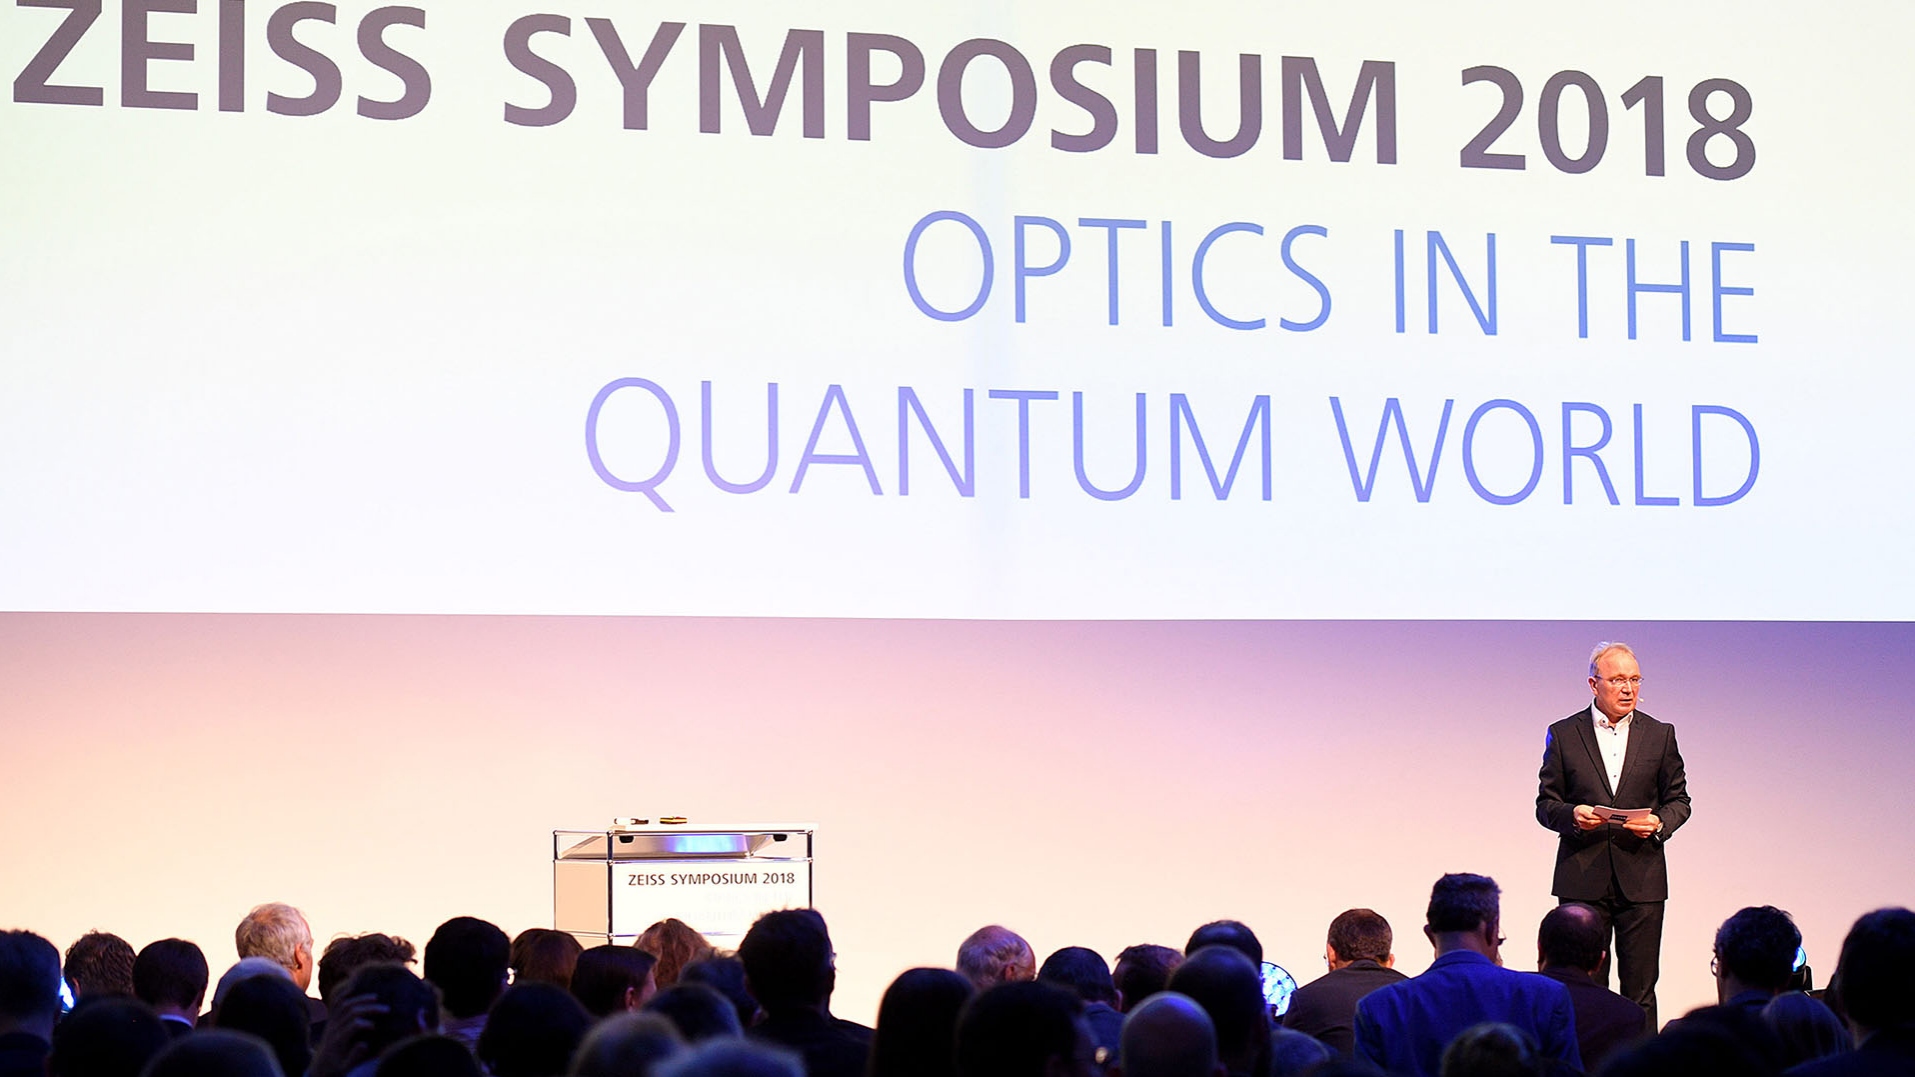 Around 300 international experts from the science and industrial sector came together at the ZEISS Symposium &quot;Optics in the Quantum World&quot; to discuss trends and new scientific findings in quantum technologies.